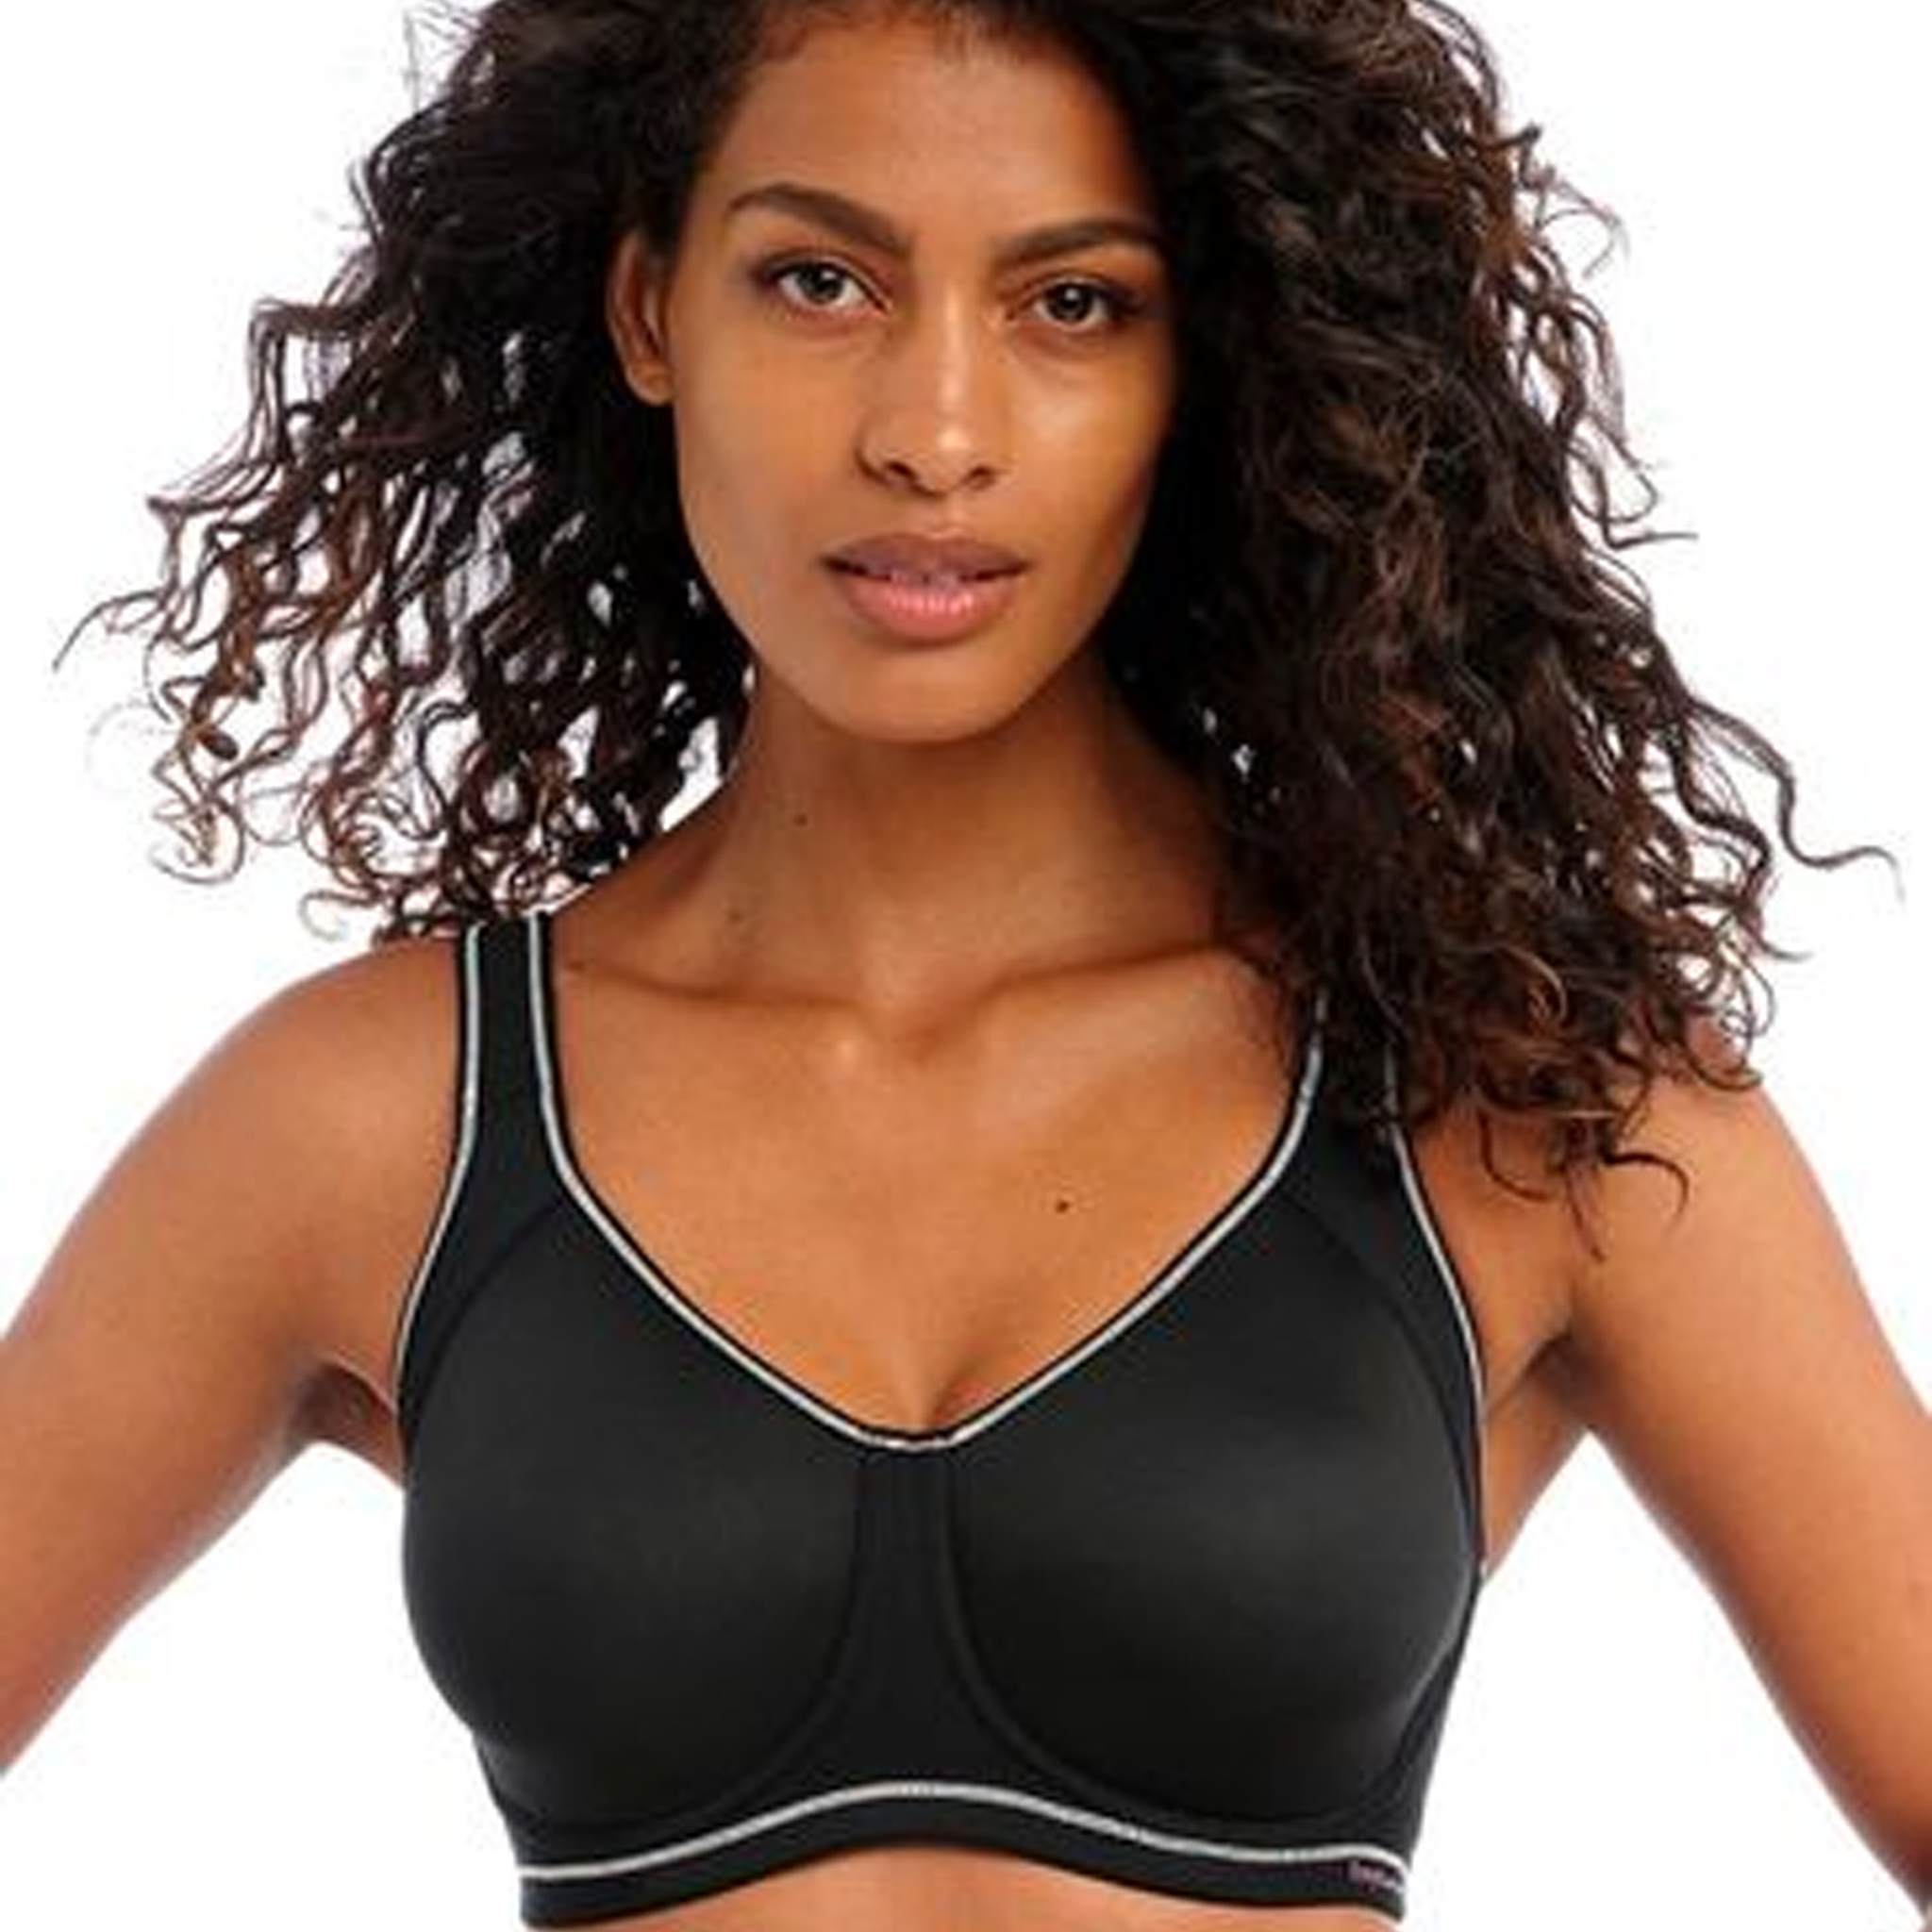 Freya Storm Moulded Sports Bra – Ordinarily Active